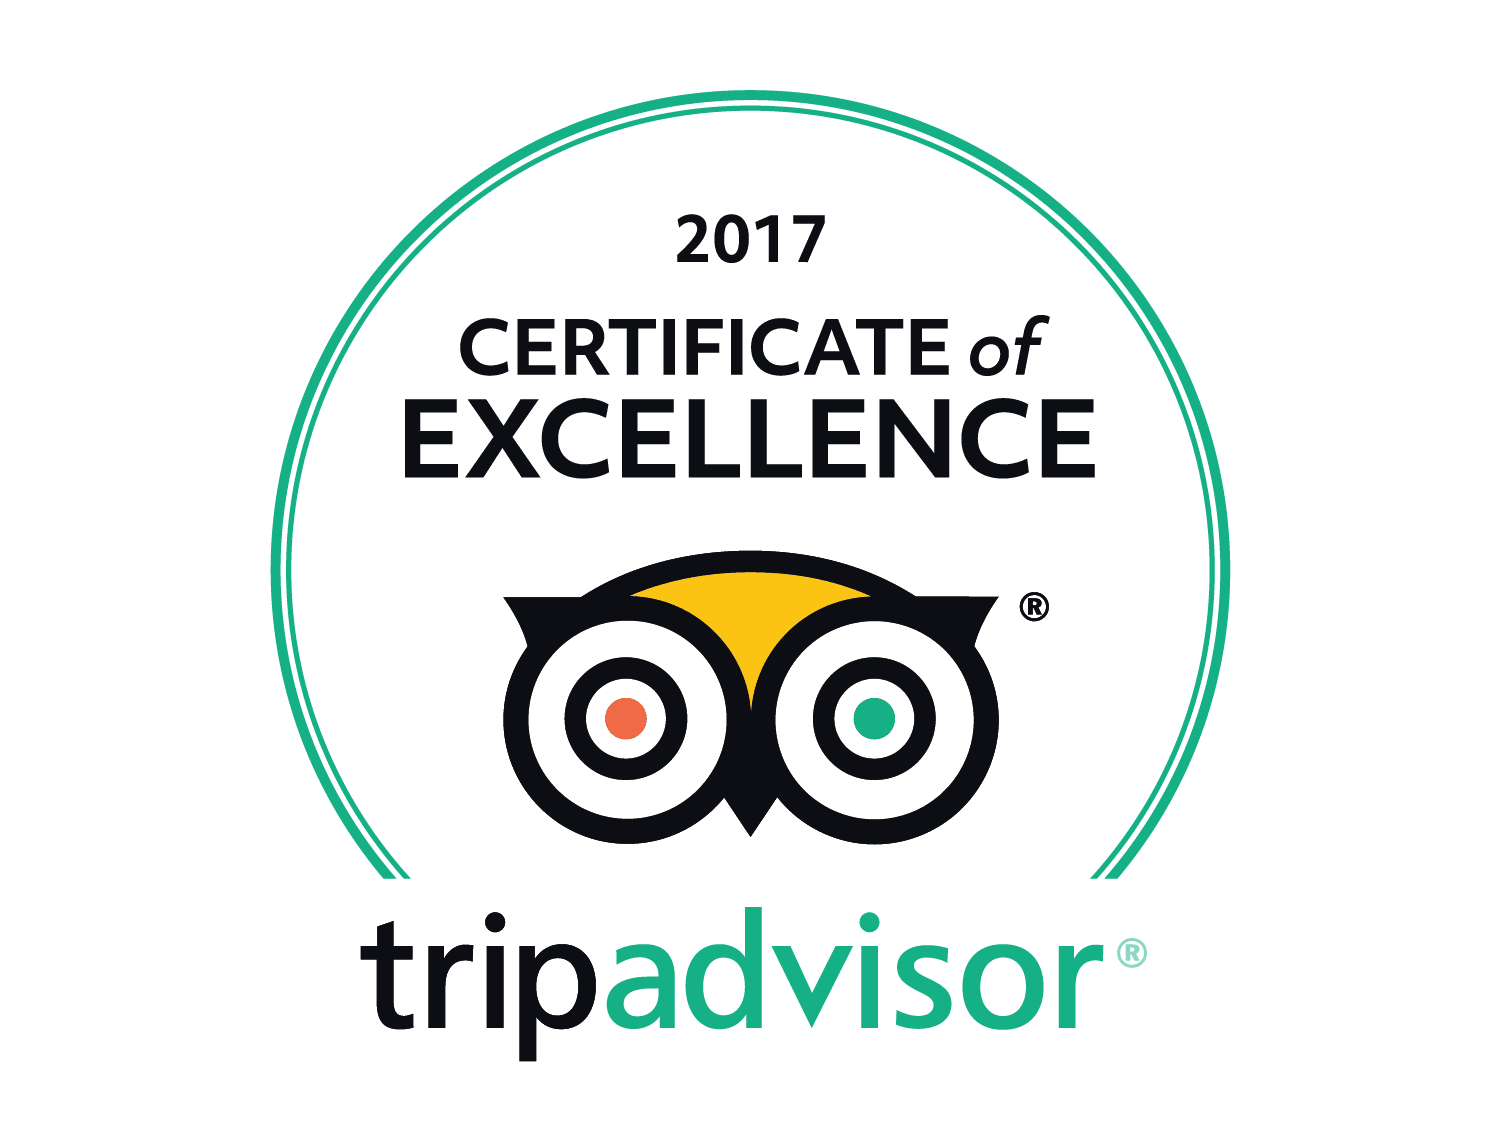 Visit Champagne My Winedays Certificate of excellence Tripadvisor 2017